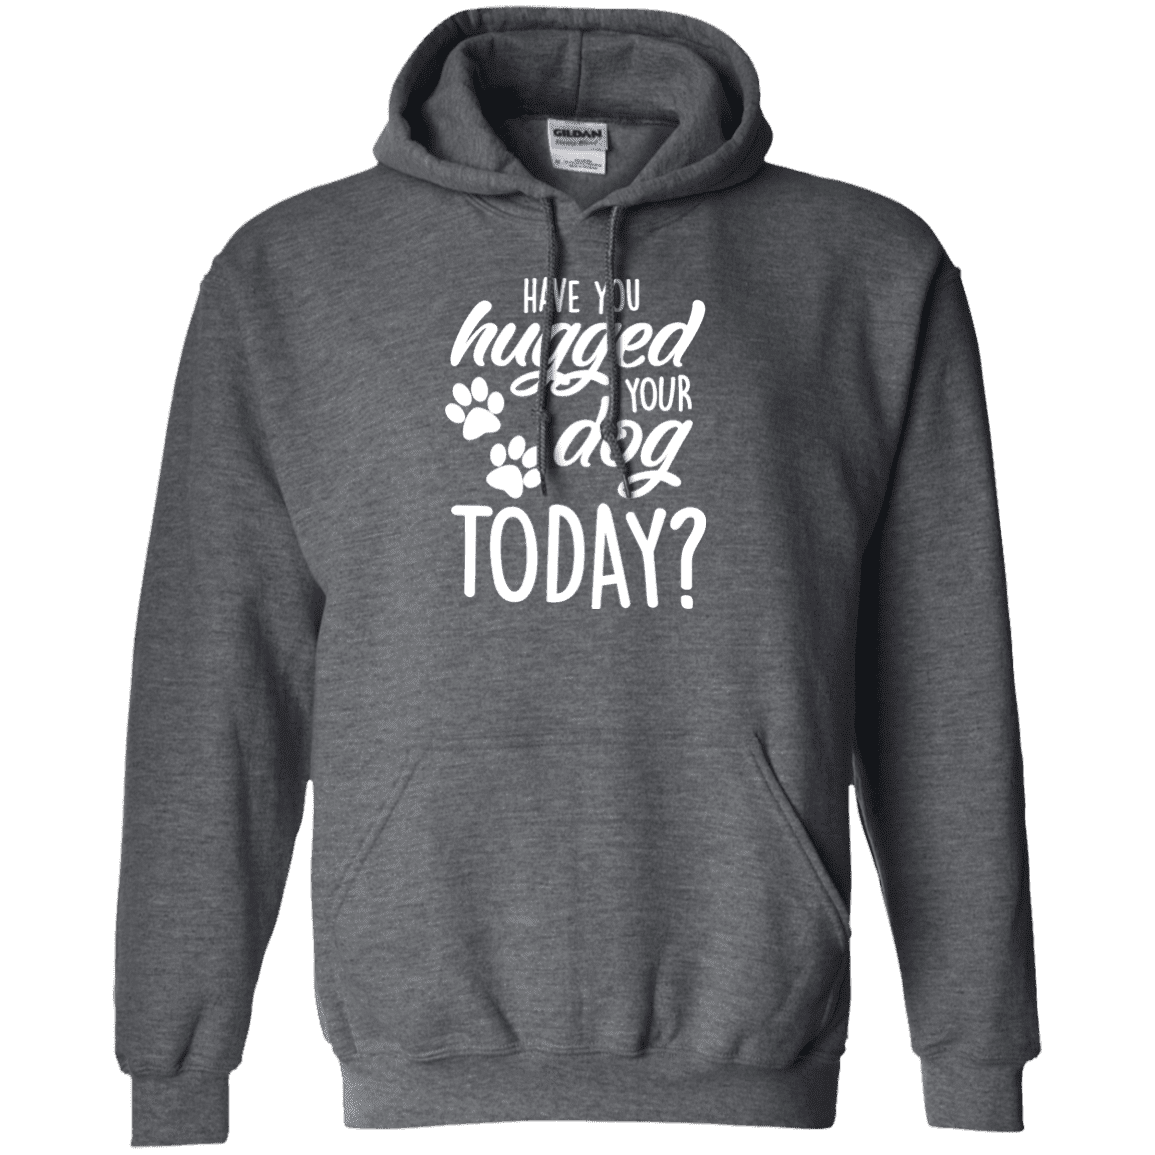 Have You Hugged Your Dog Today? - Hoodie.